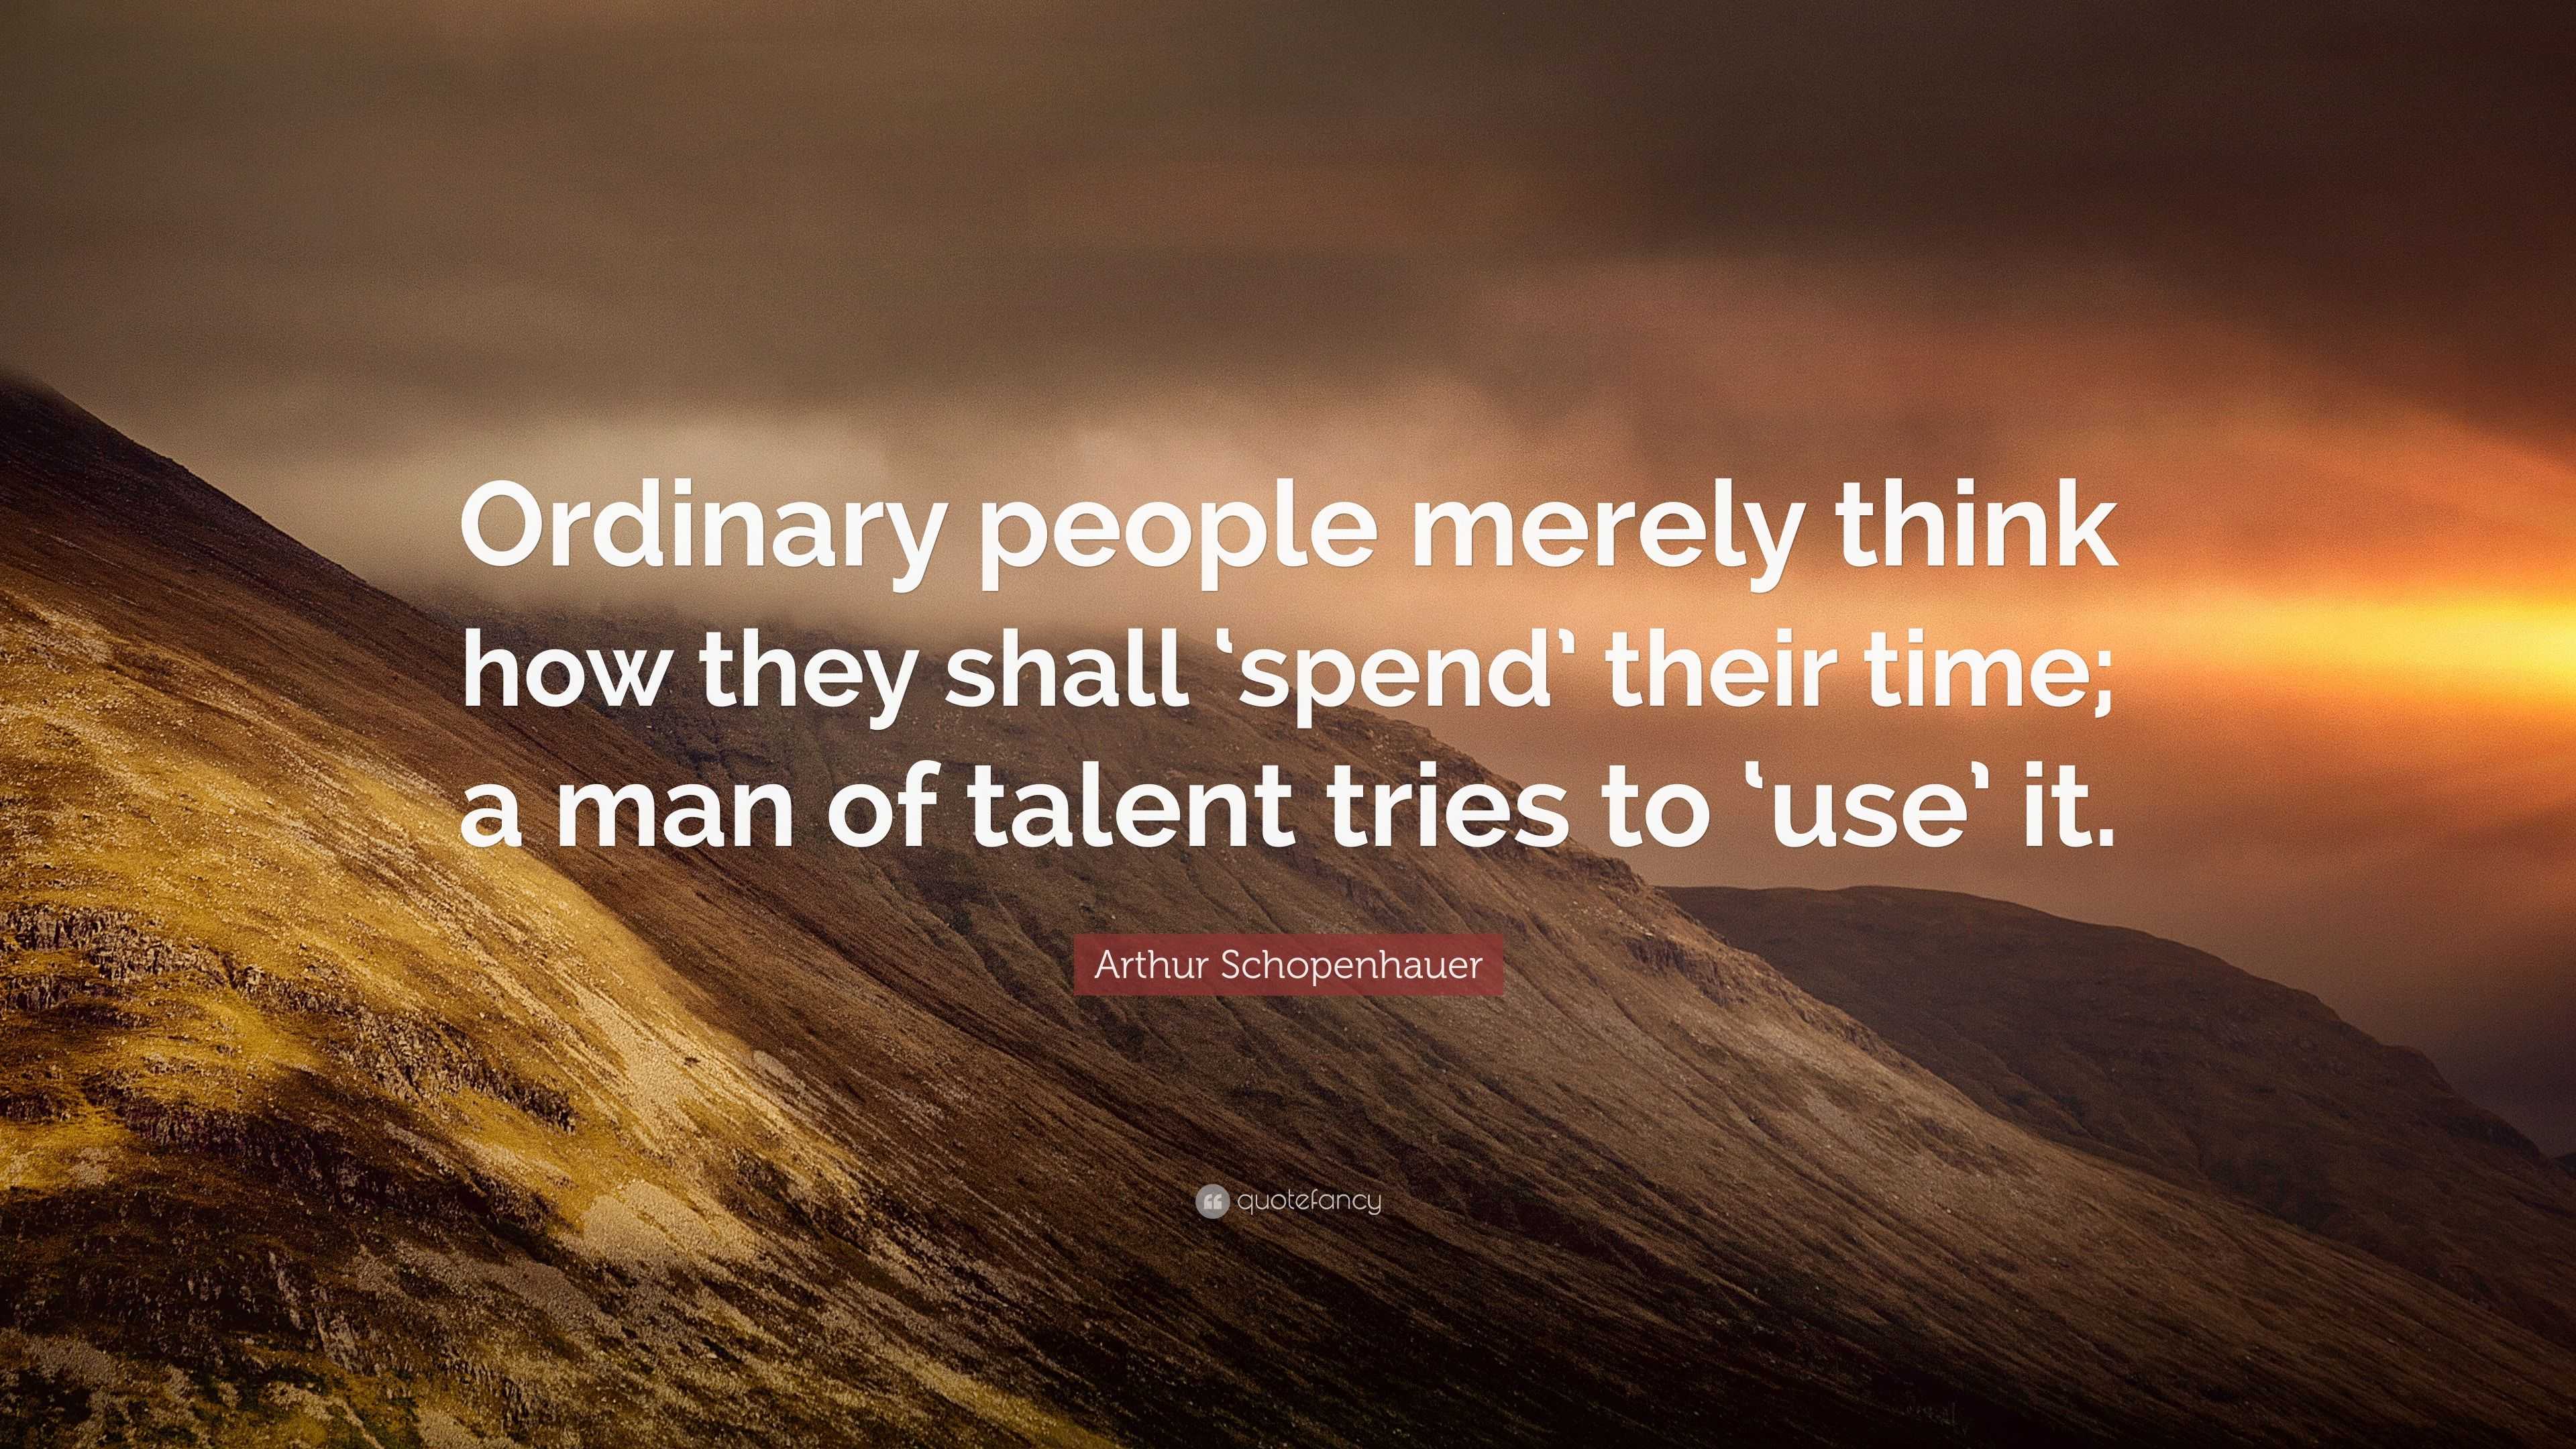 Ordinary people merely think how they shall 'spend' their time; a man of  talent tries to 'use' it.